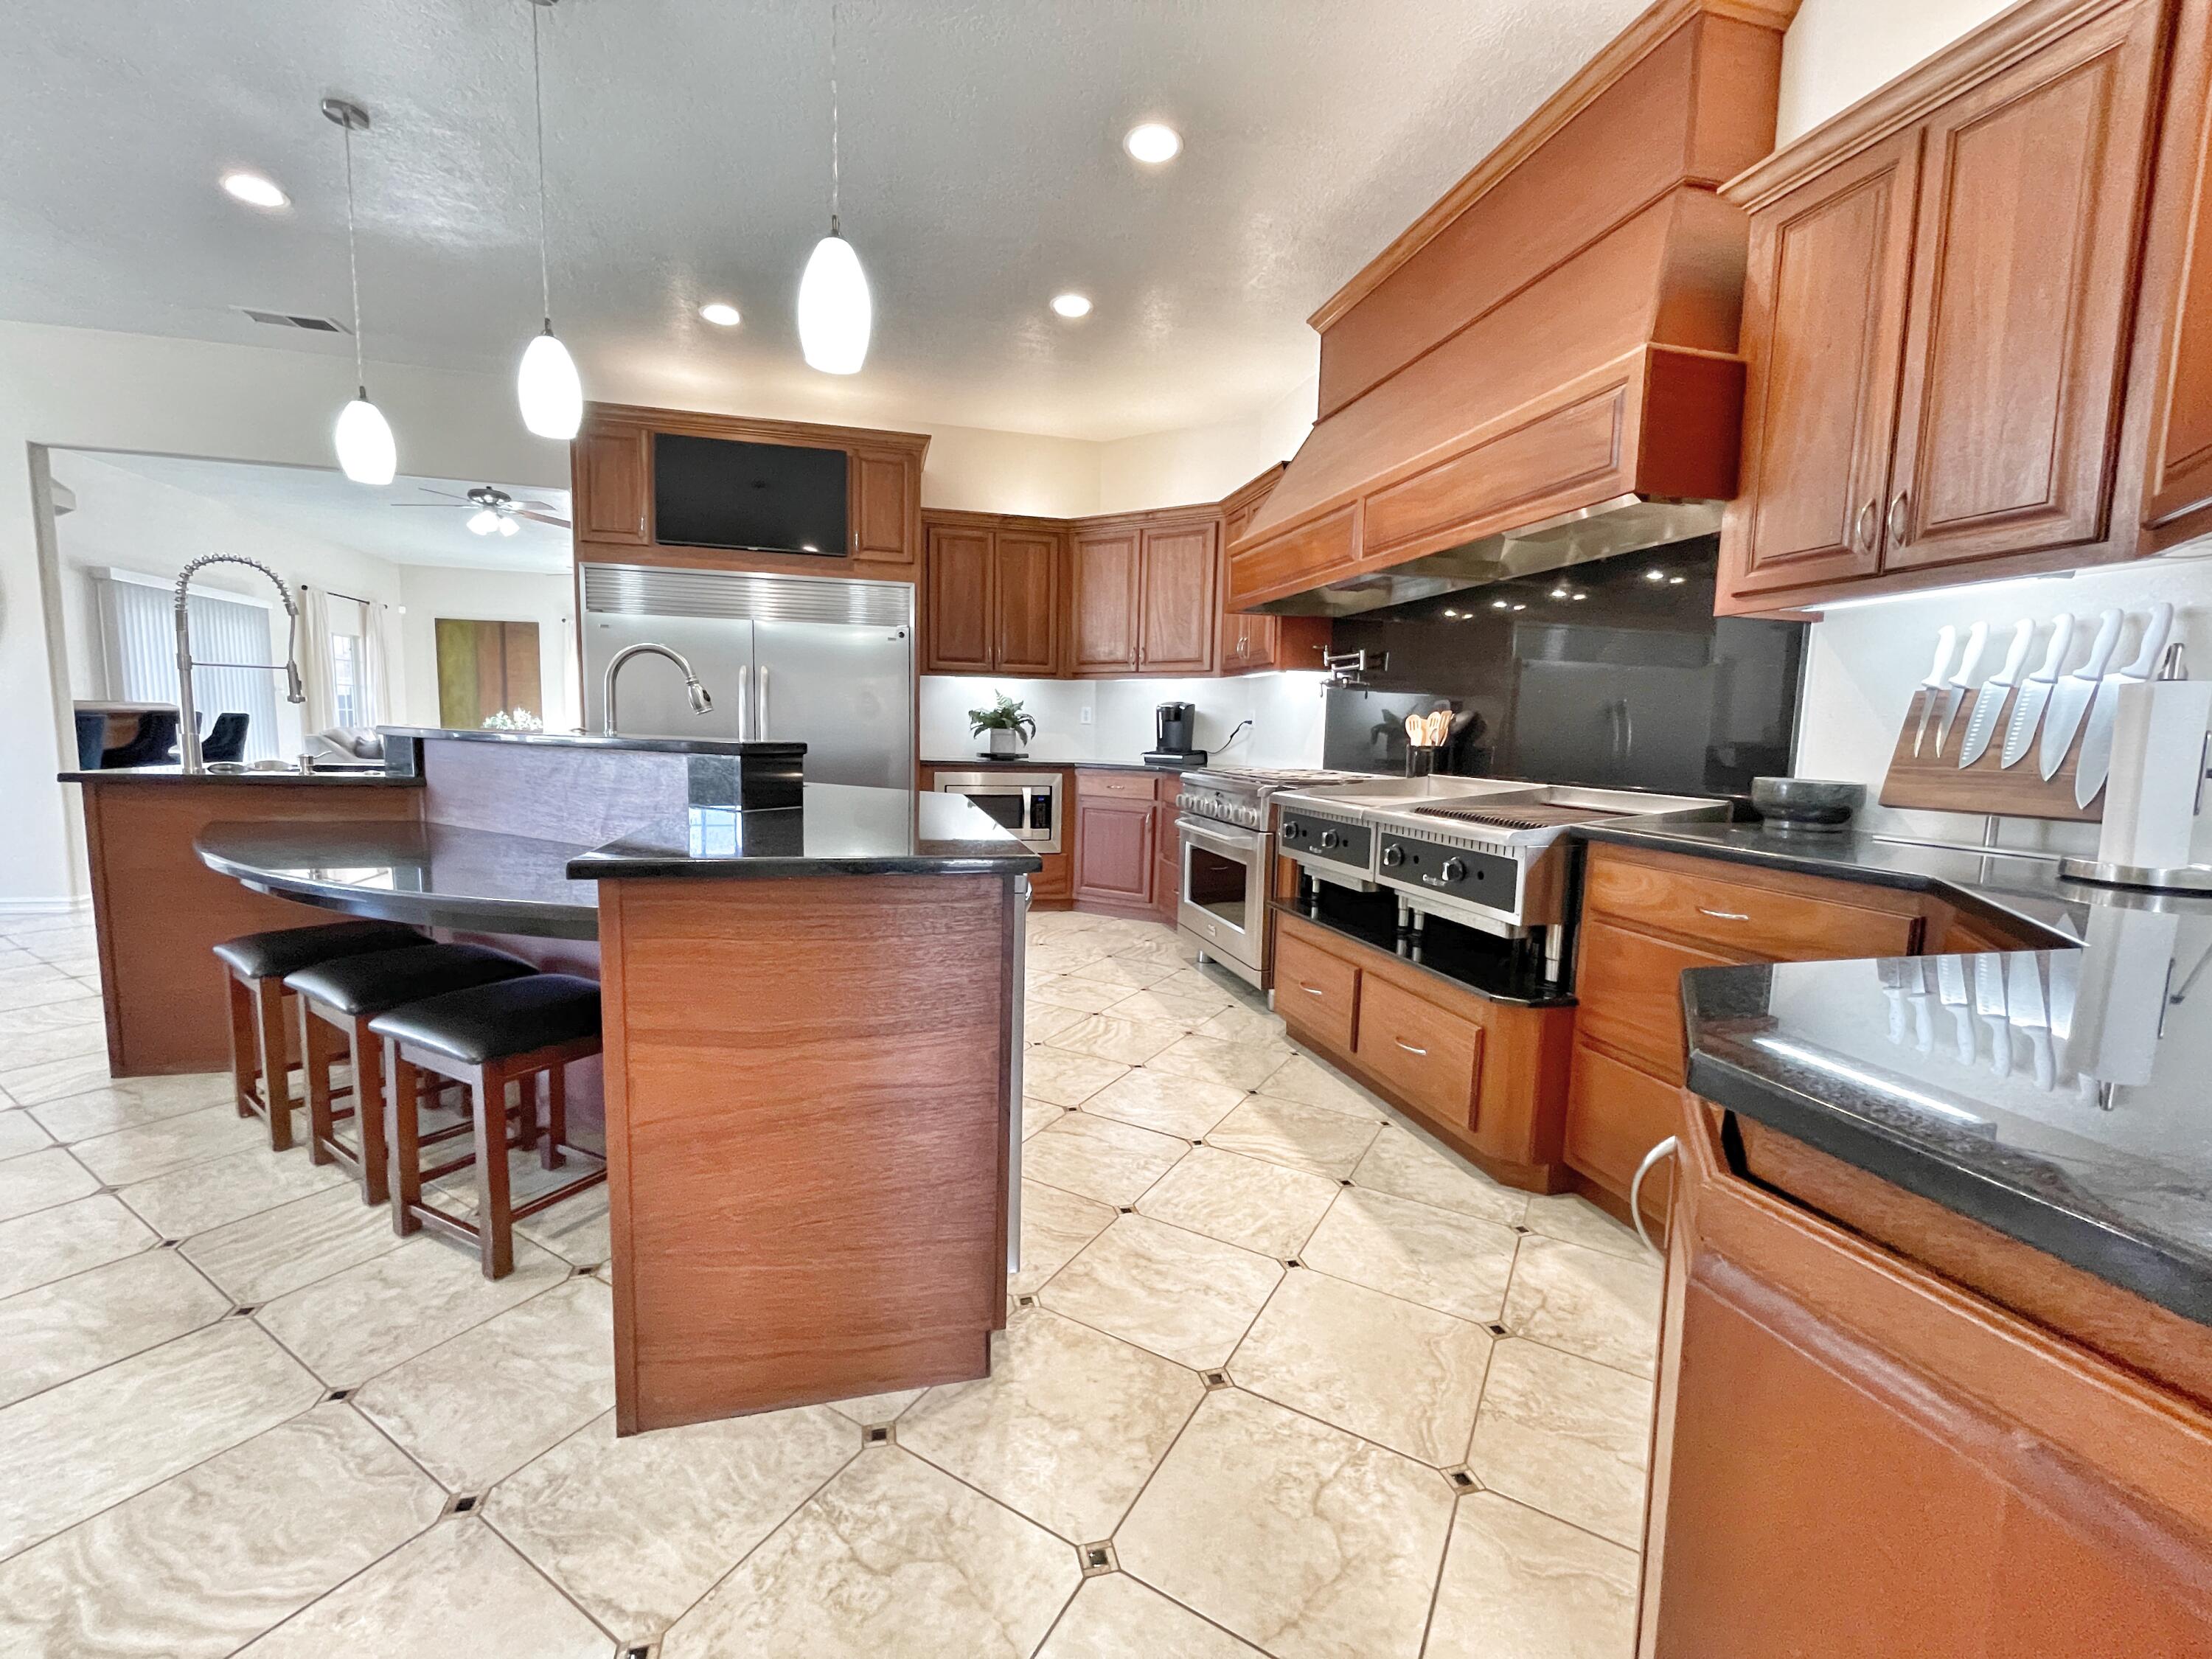 **2.75% VA assumable loan for qualified borrowers!** You must see this beautiful N Valley gem in person to appreciate it!  Fall in love with your dream chef's kitchen. The 36'' GE Monogram Stove 6-18k btu burners w/reversible wok feature, Centaur griddle & Broiler has a custom 8' built-in range hood. The built-in stainless steel Kenmore freezer refrigerator combo frames this custom kitchen perfectly! This spacious floor plan offers large bedrooms & ample storage. An entertainer's delight w/ a wet bar featuring a 3 keg Beverage Air kegerator/fridge, Manitowoc Ice Machine, 6 dispenser soda wand & bar sink. The HUGE laundry room will accommodate your dble stacked washer dryer sets. Refrigerated air and multiple heat sources.  It is even more impressive in person so come take a look!